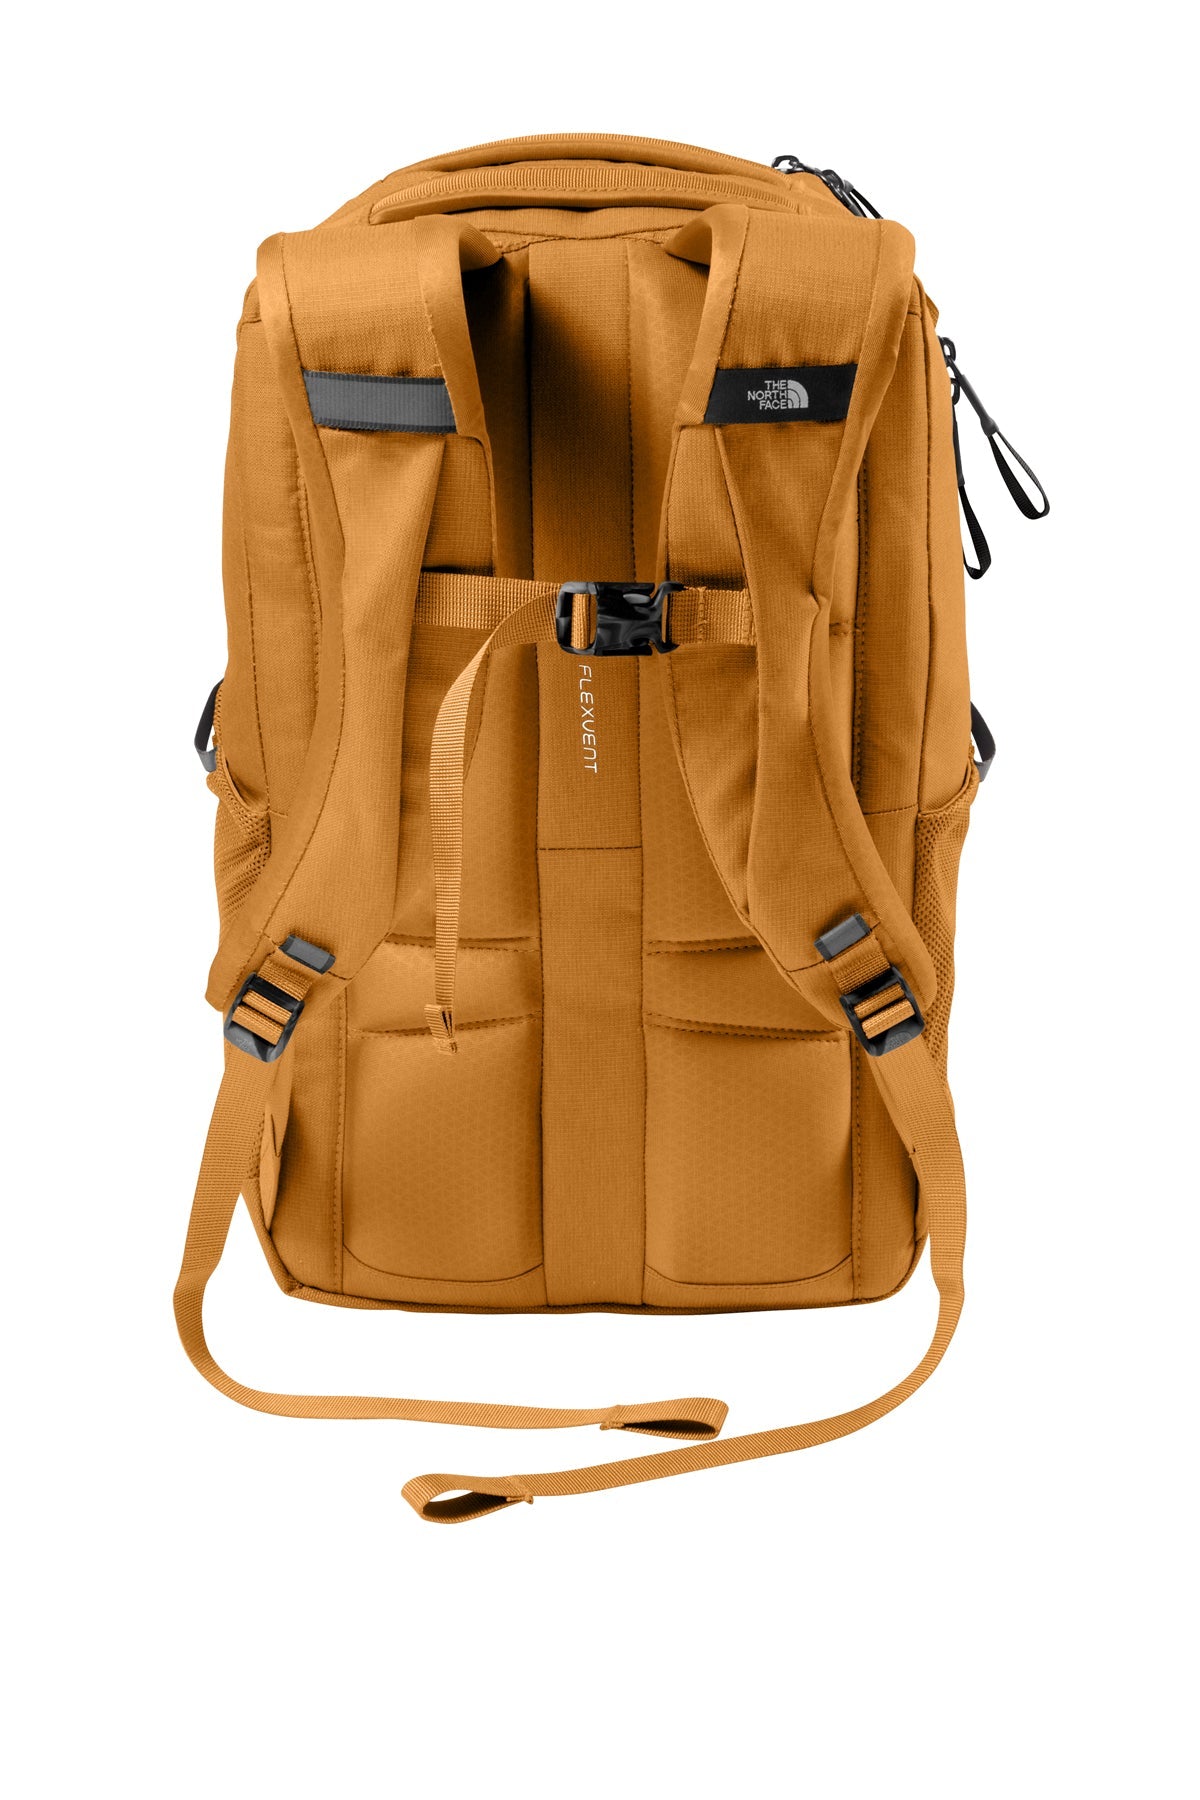 The North Face Stalwart Backpack Timber Tan